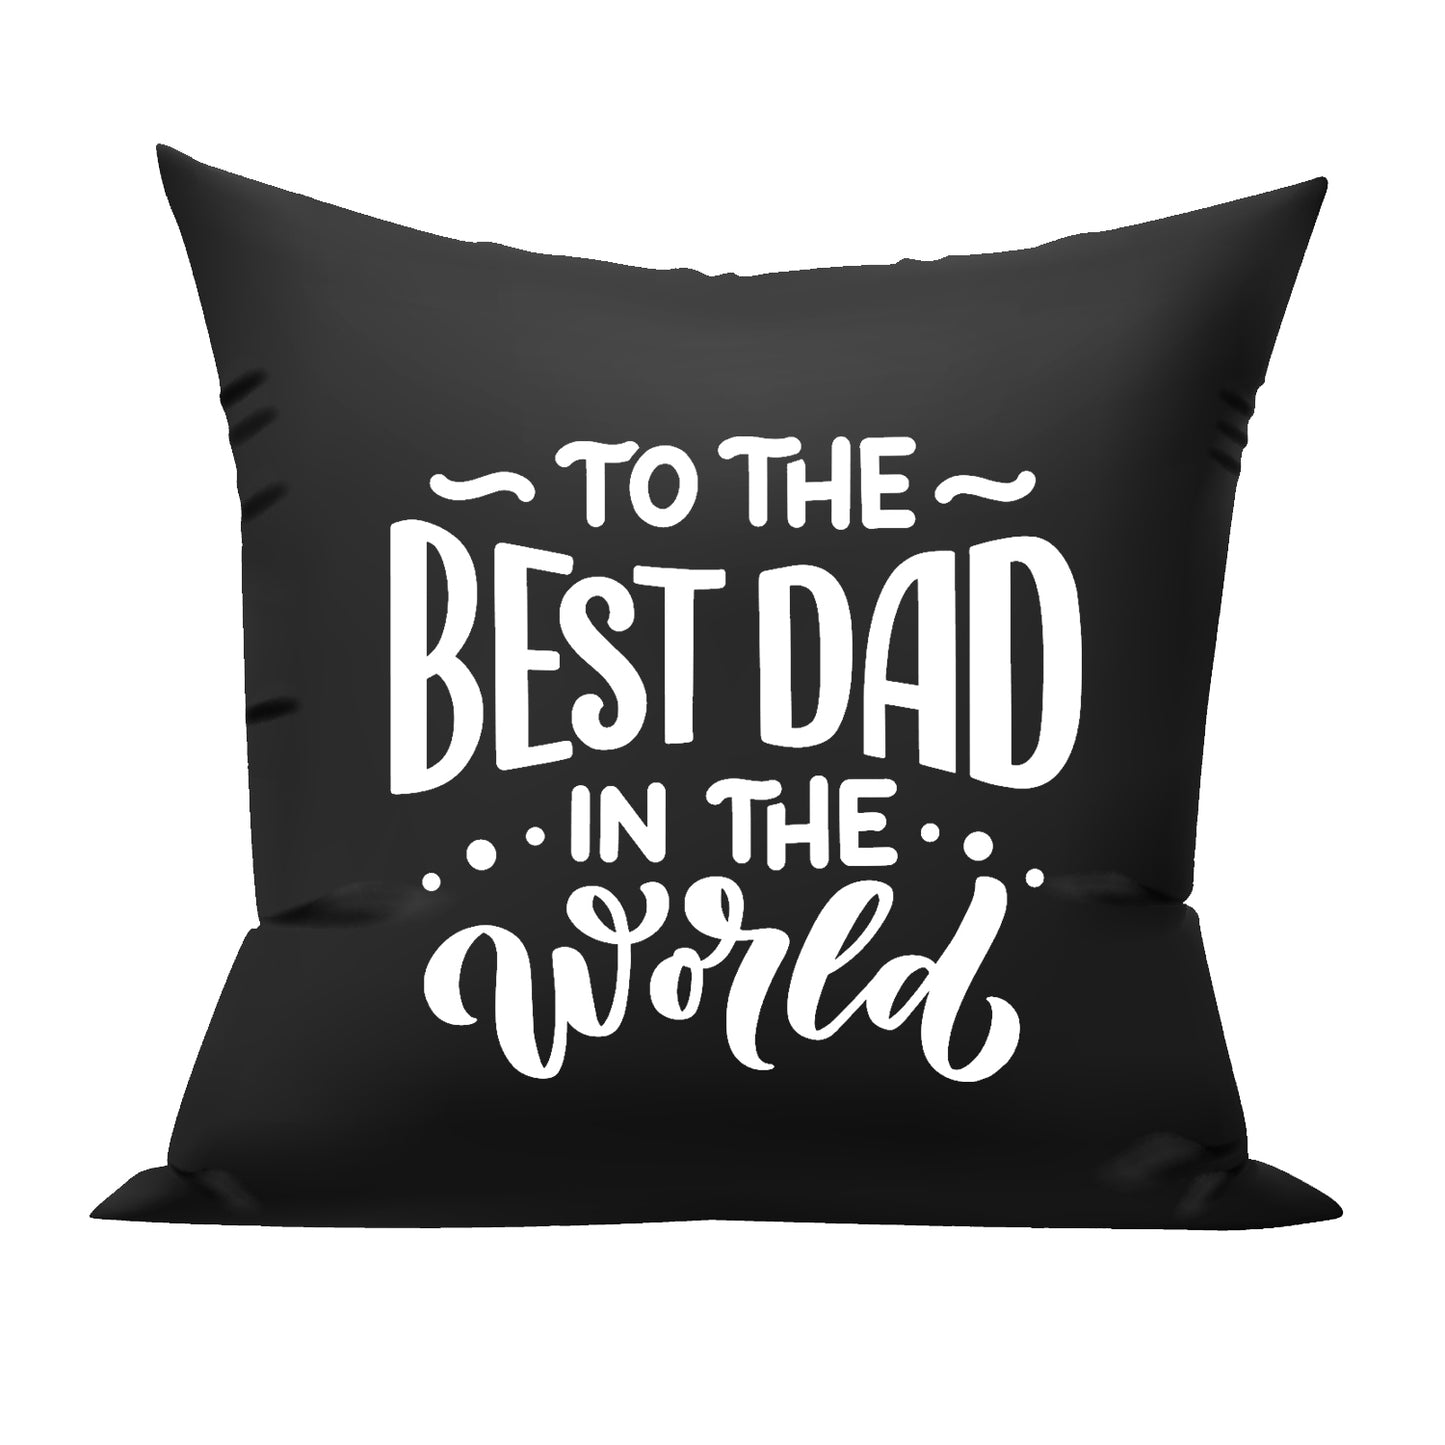 To the Best Dad in the World cushion gifts for father